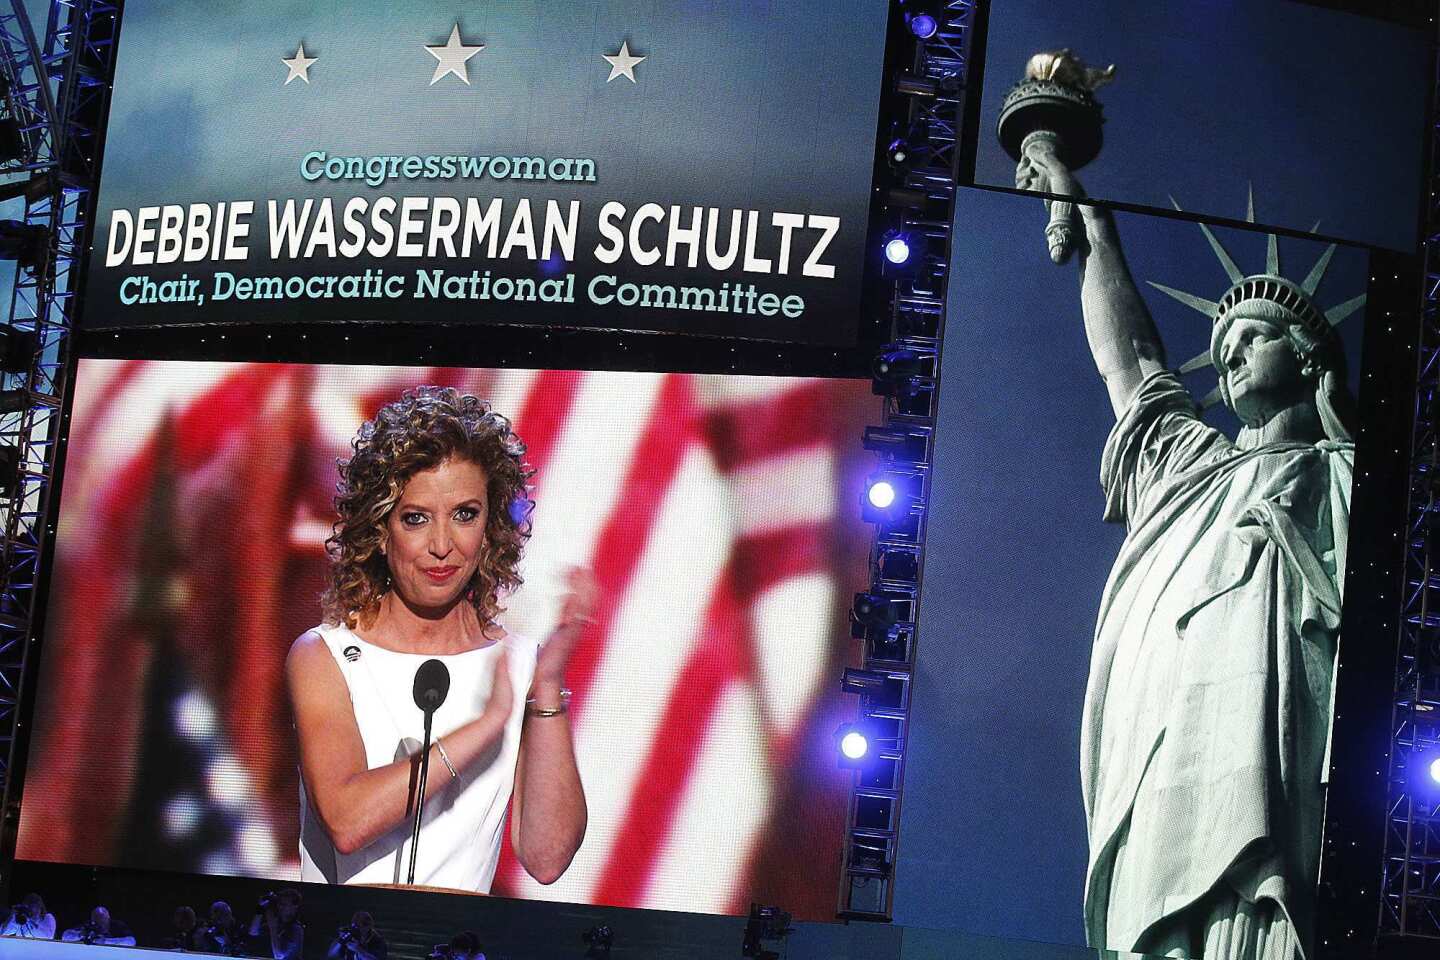 Democratic National Committee Chairwoman Debbie Wasserman Schultz officially opens the Democratic convention at Time Warner Cable Arena in Charlotte, N.C.